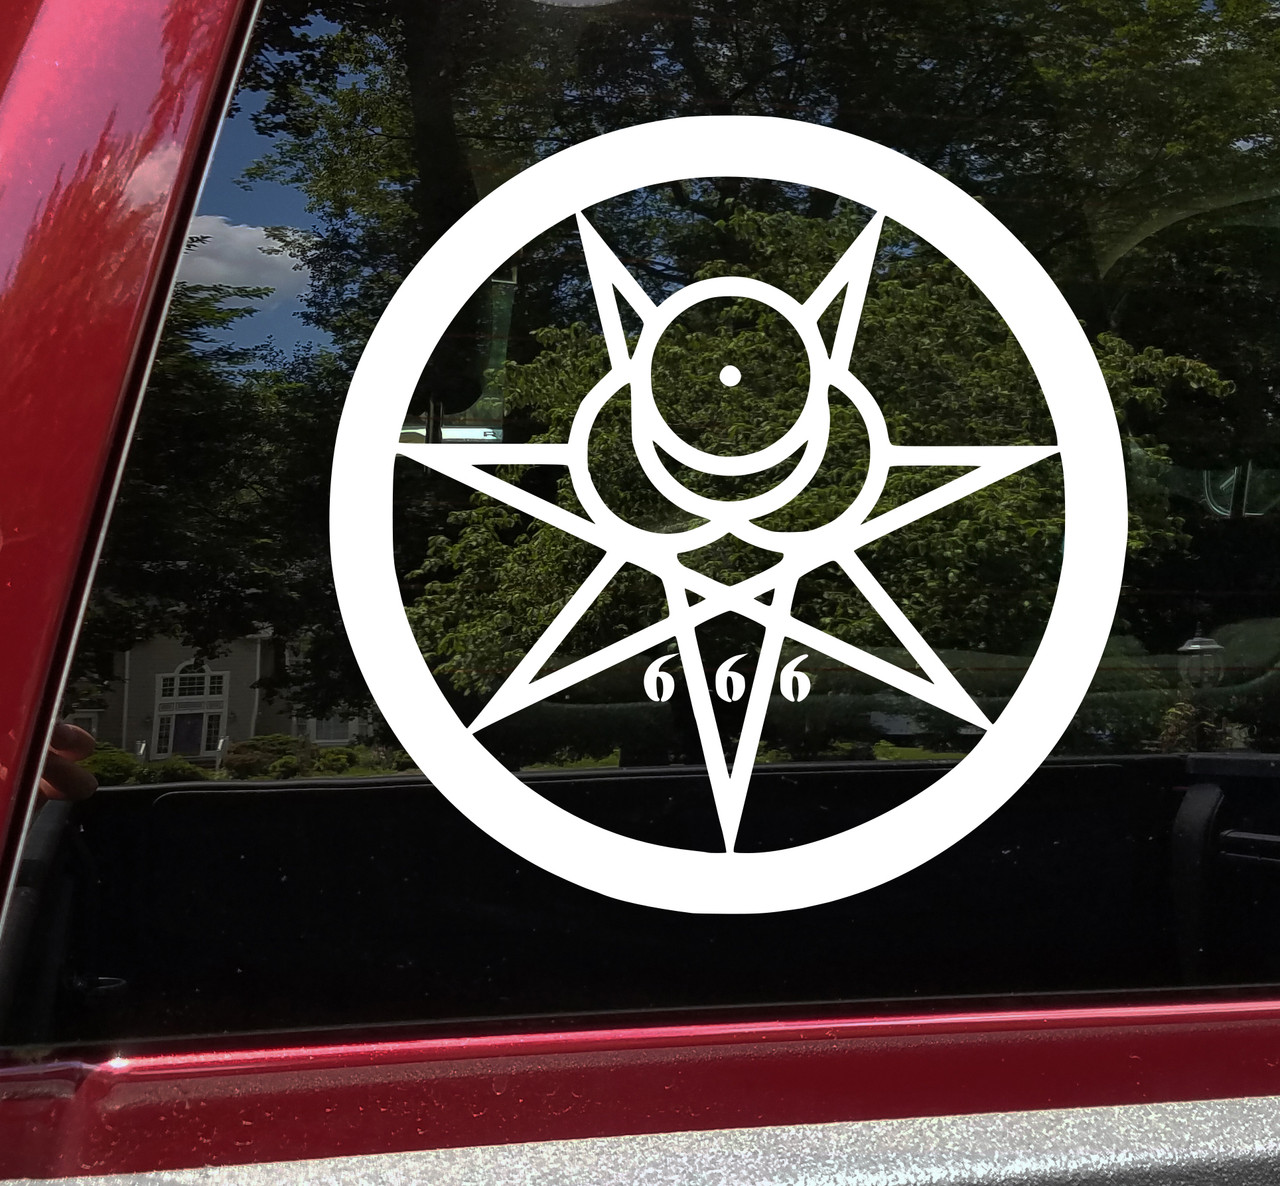 Mark of the Beast Thelema Vinyl Decal - 666 Therion Esoteric - Die Cut Sticker